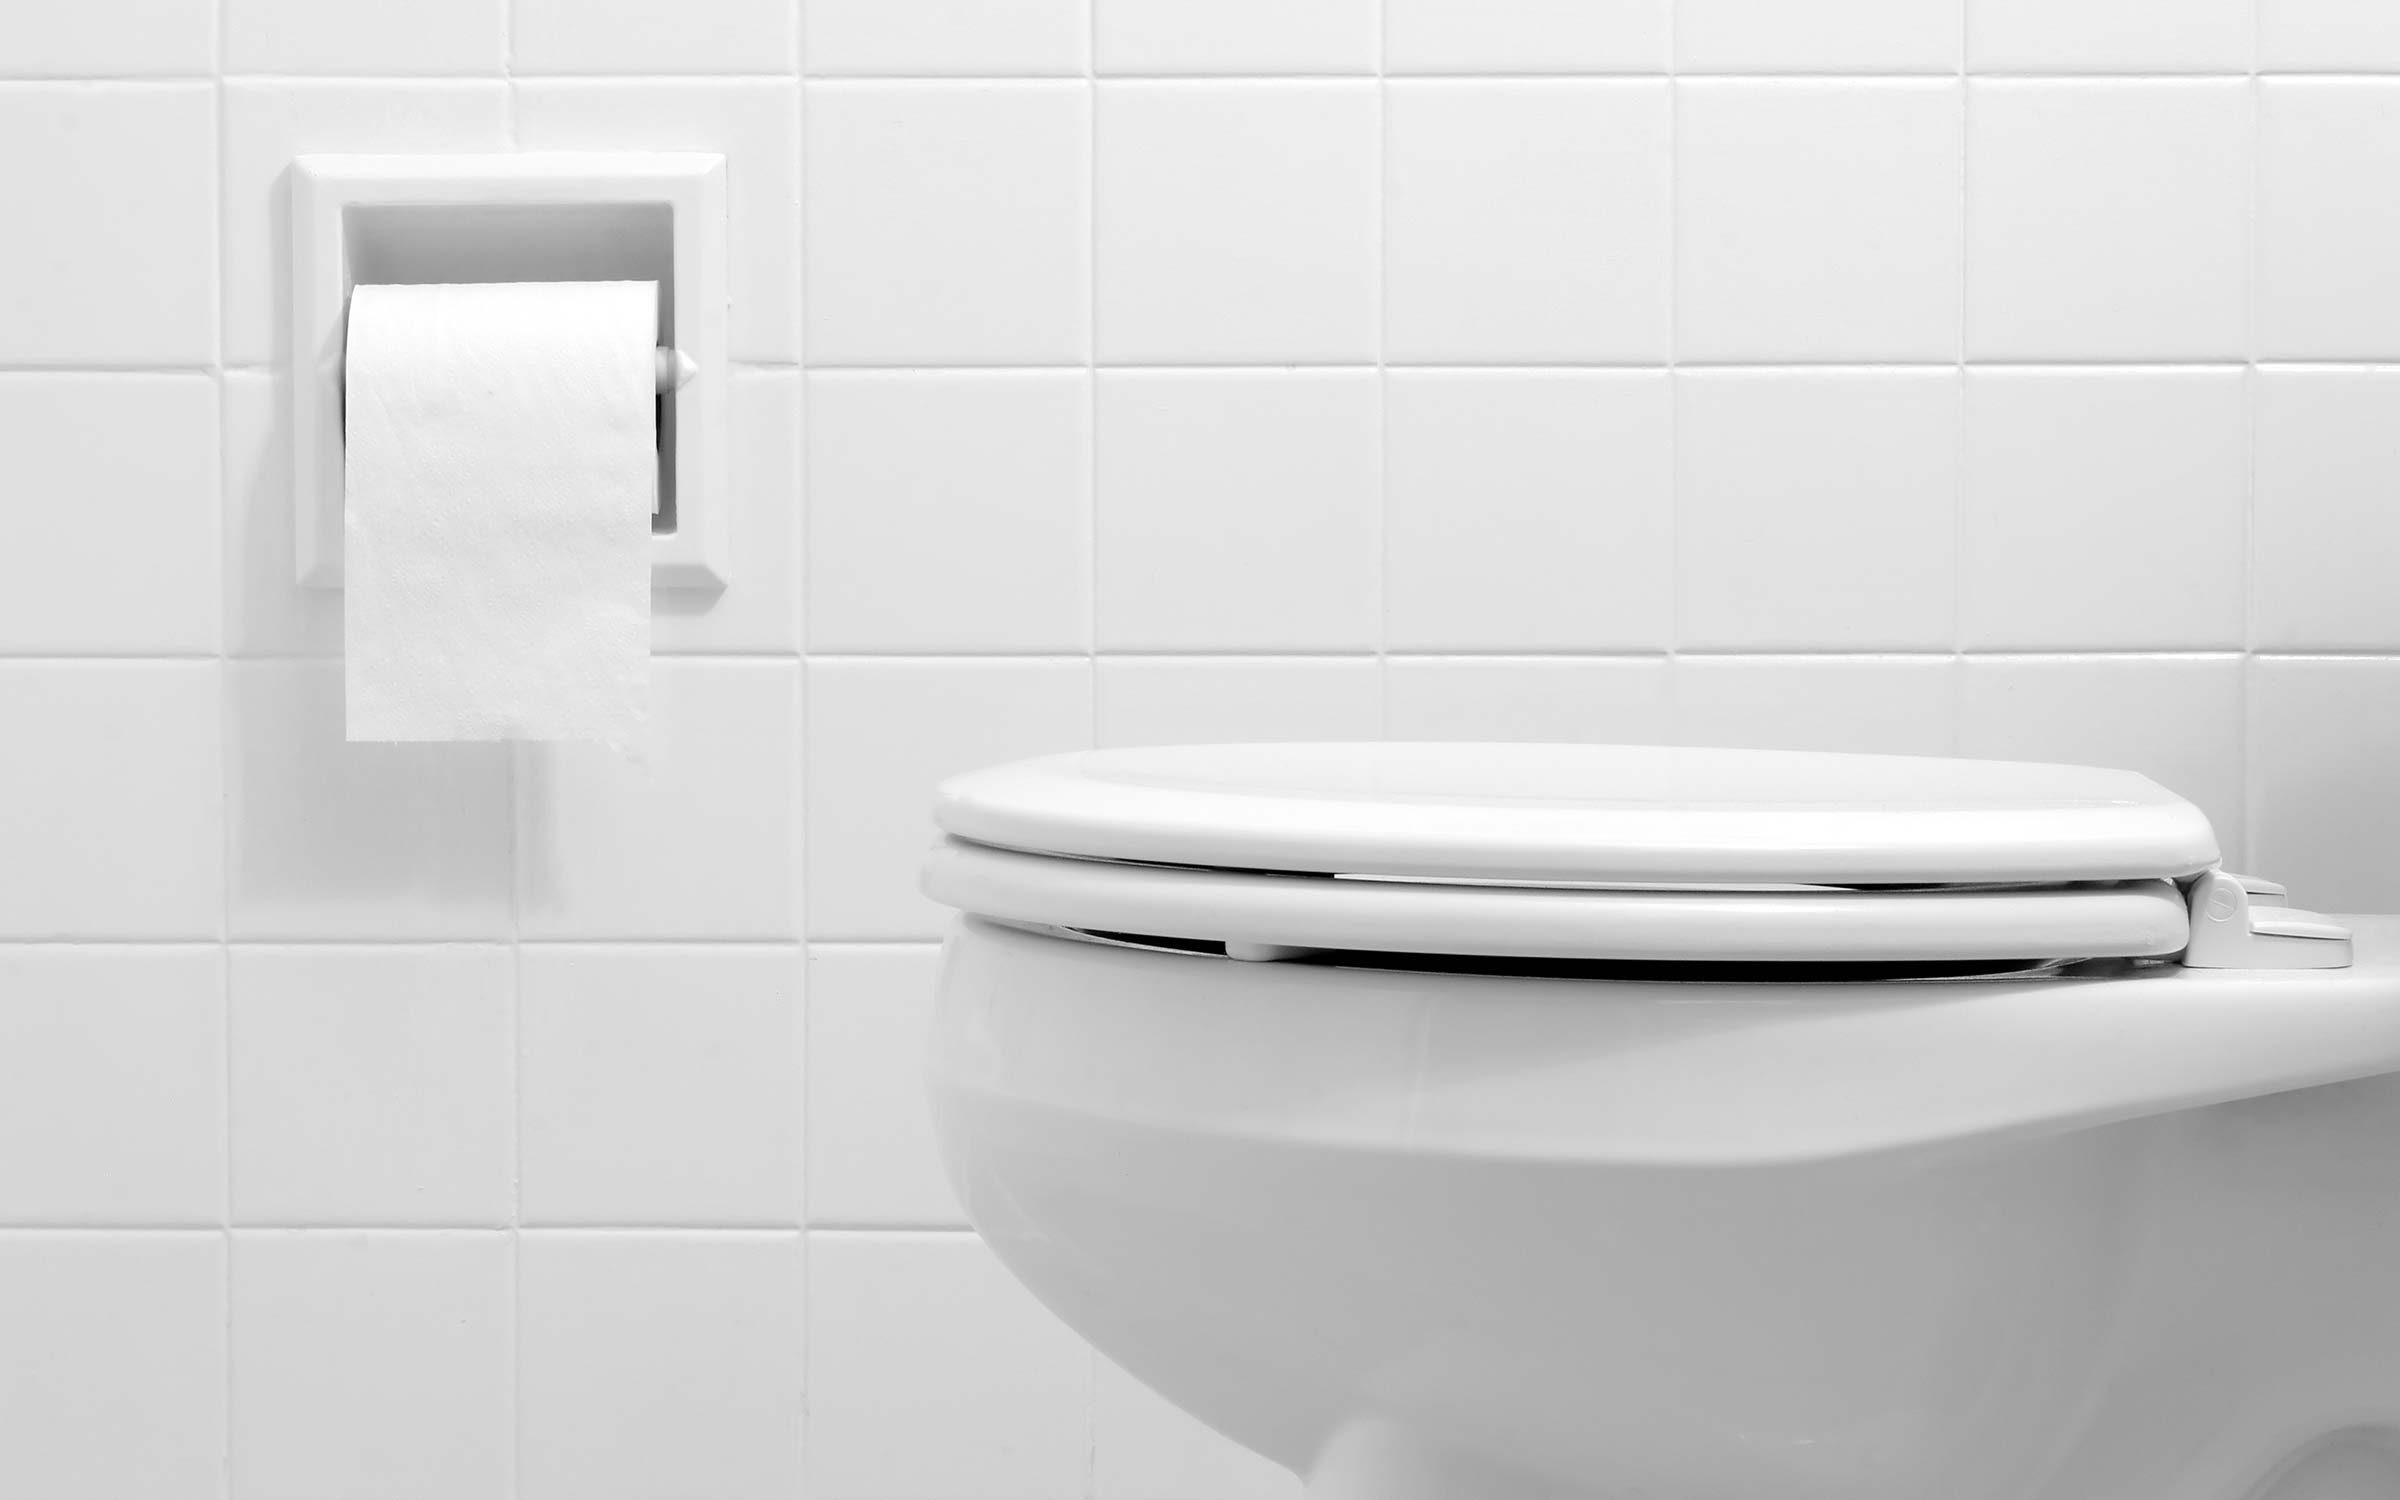 7 Symptoms of a Urinary Infection Everyone Should Know